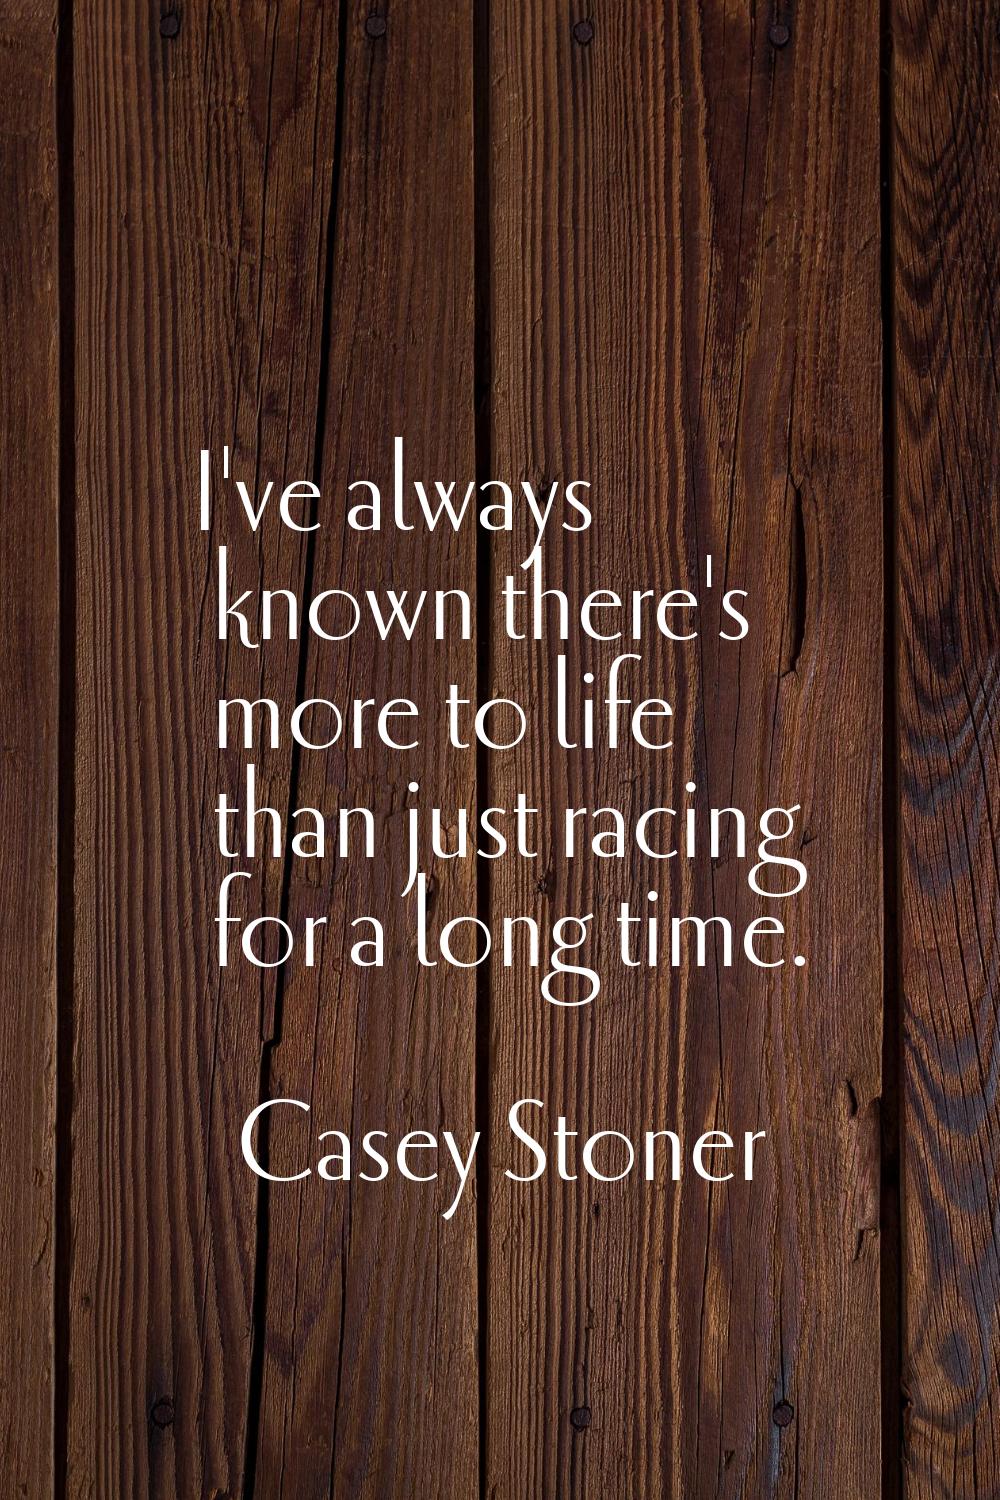 I've always known there's more to life than just racing for a long time.